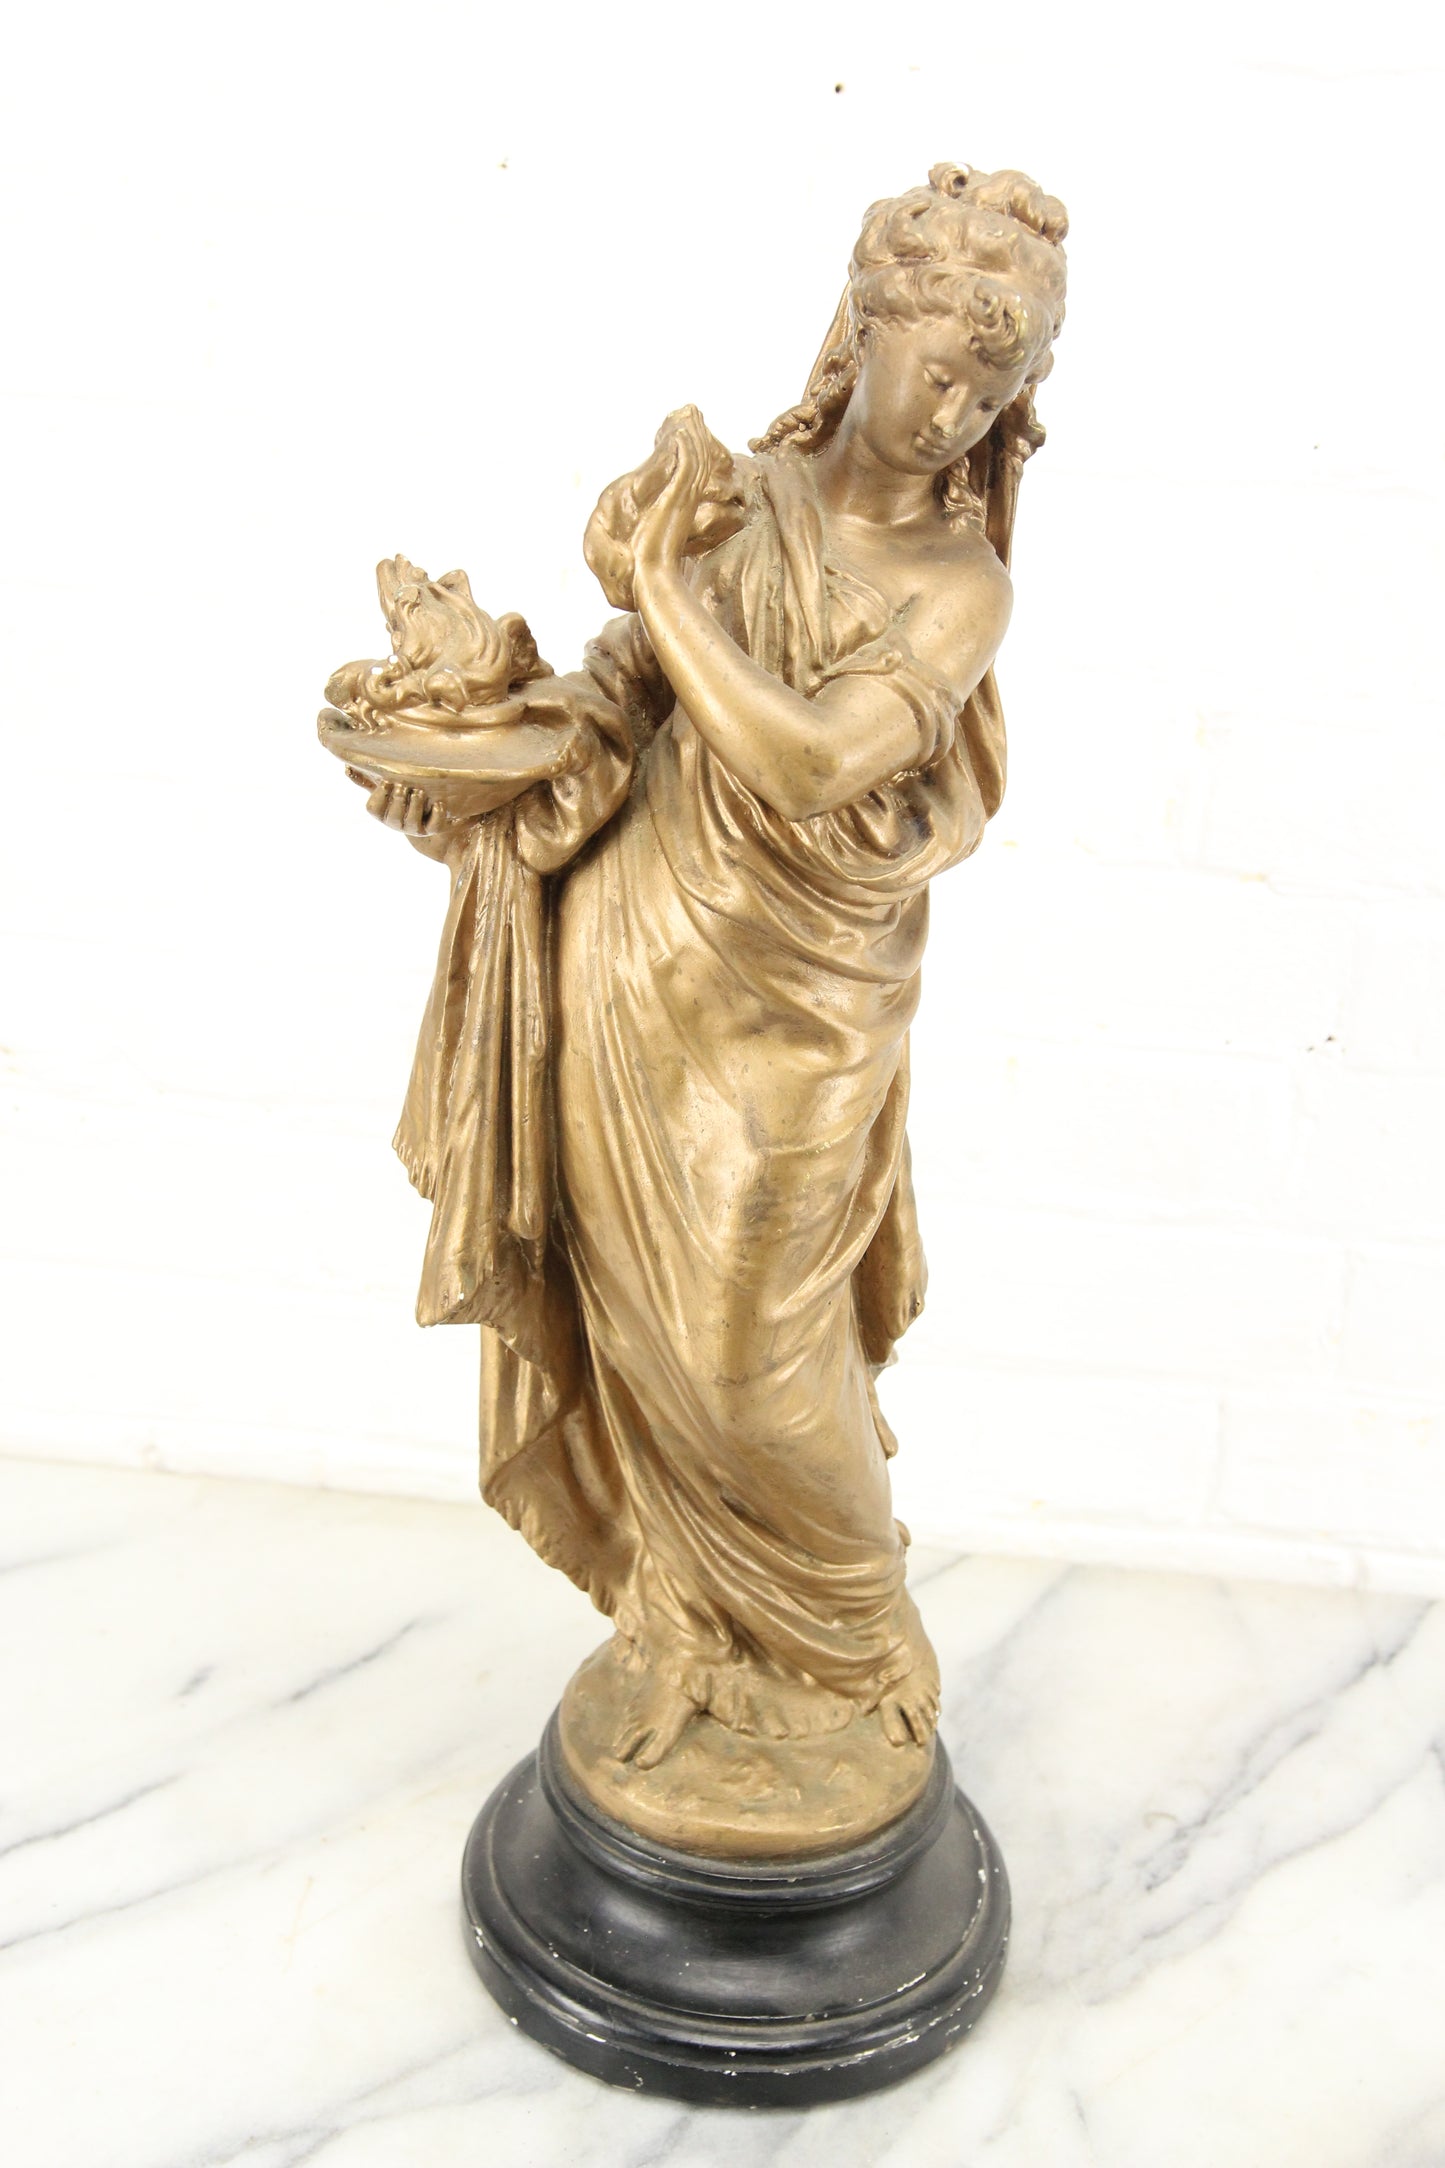 Golden Chalkware Statue of a Woman in Flowing Robes by Marwal Industries Inc.